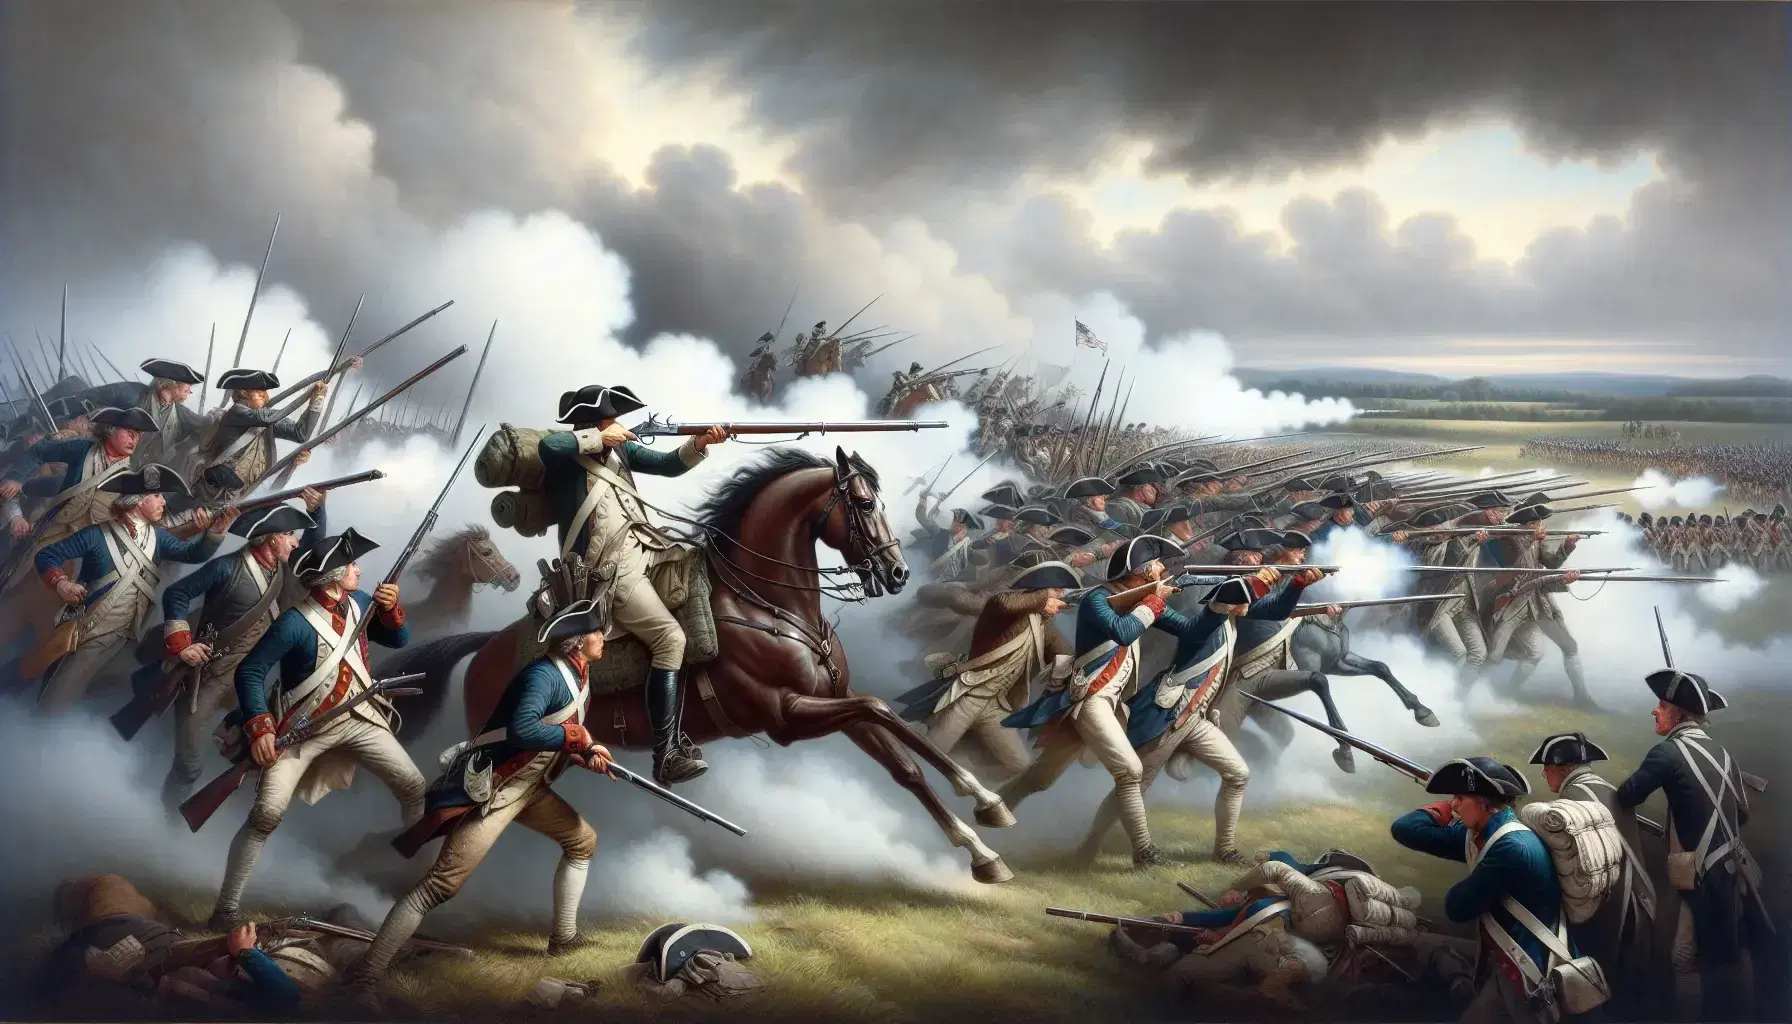 American Revolutionary War battle scene with Continental Army soldiers firing muskets amid smoke and knight with raised sword.